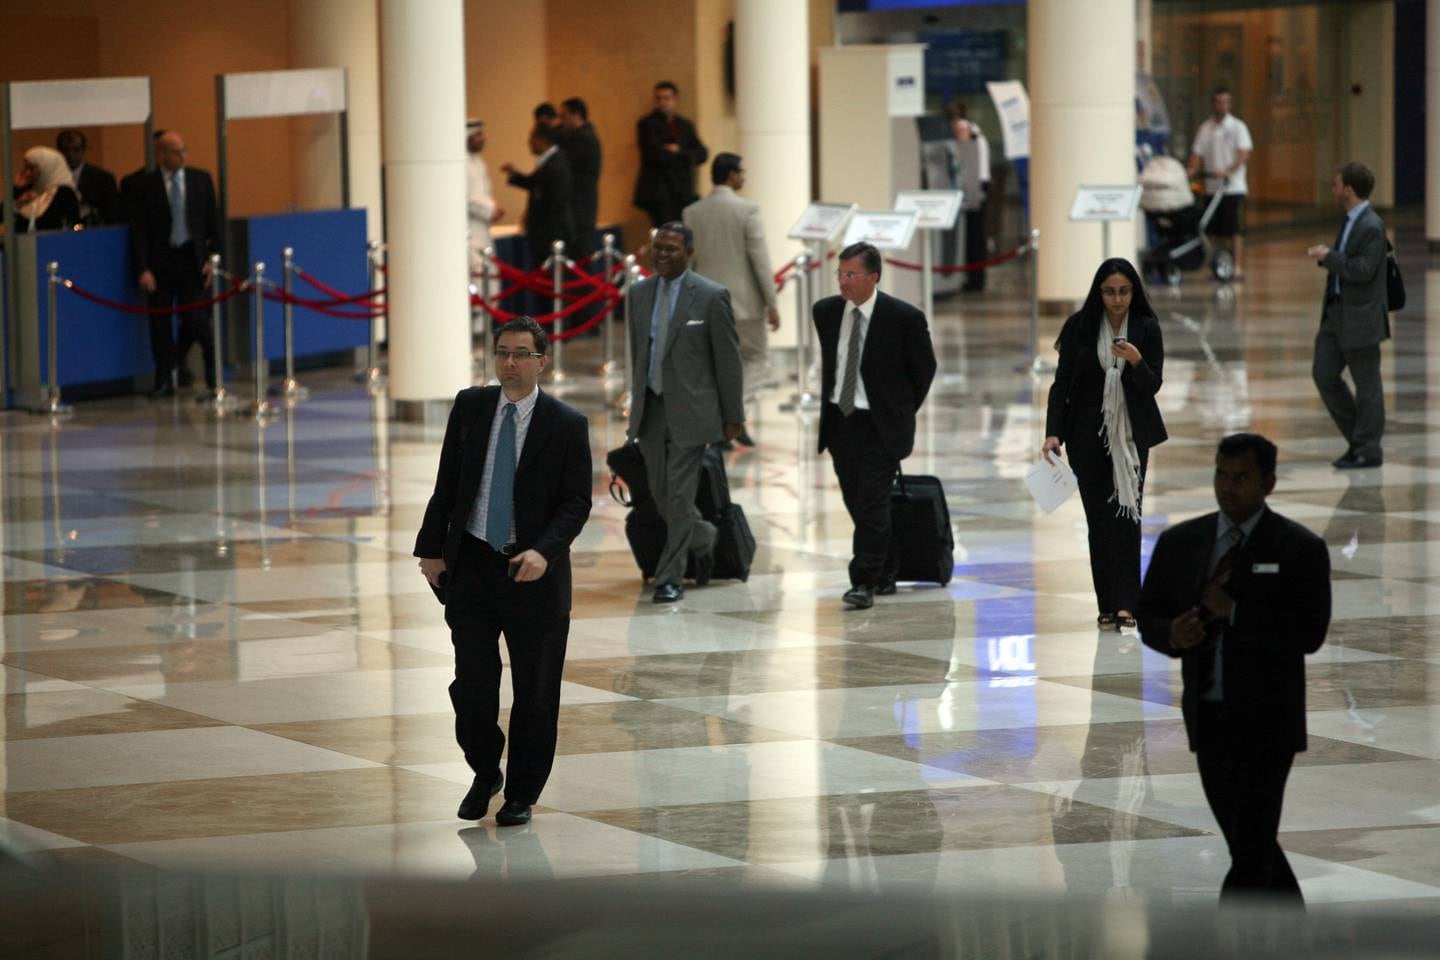 Dubai, UAE - December 21, 2009 - Bankers leaving a lending meeting between bankers and Dubai World at the Dubai World Trade Centre Exhibition Centre. (Nicole Hill / The National) *** Local Caption ***  NH BANK04.jpg